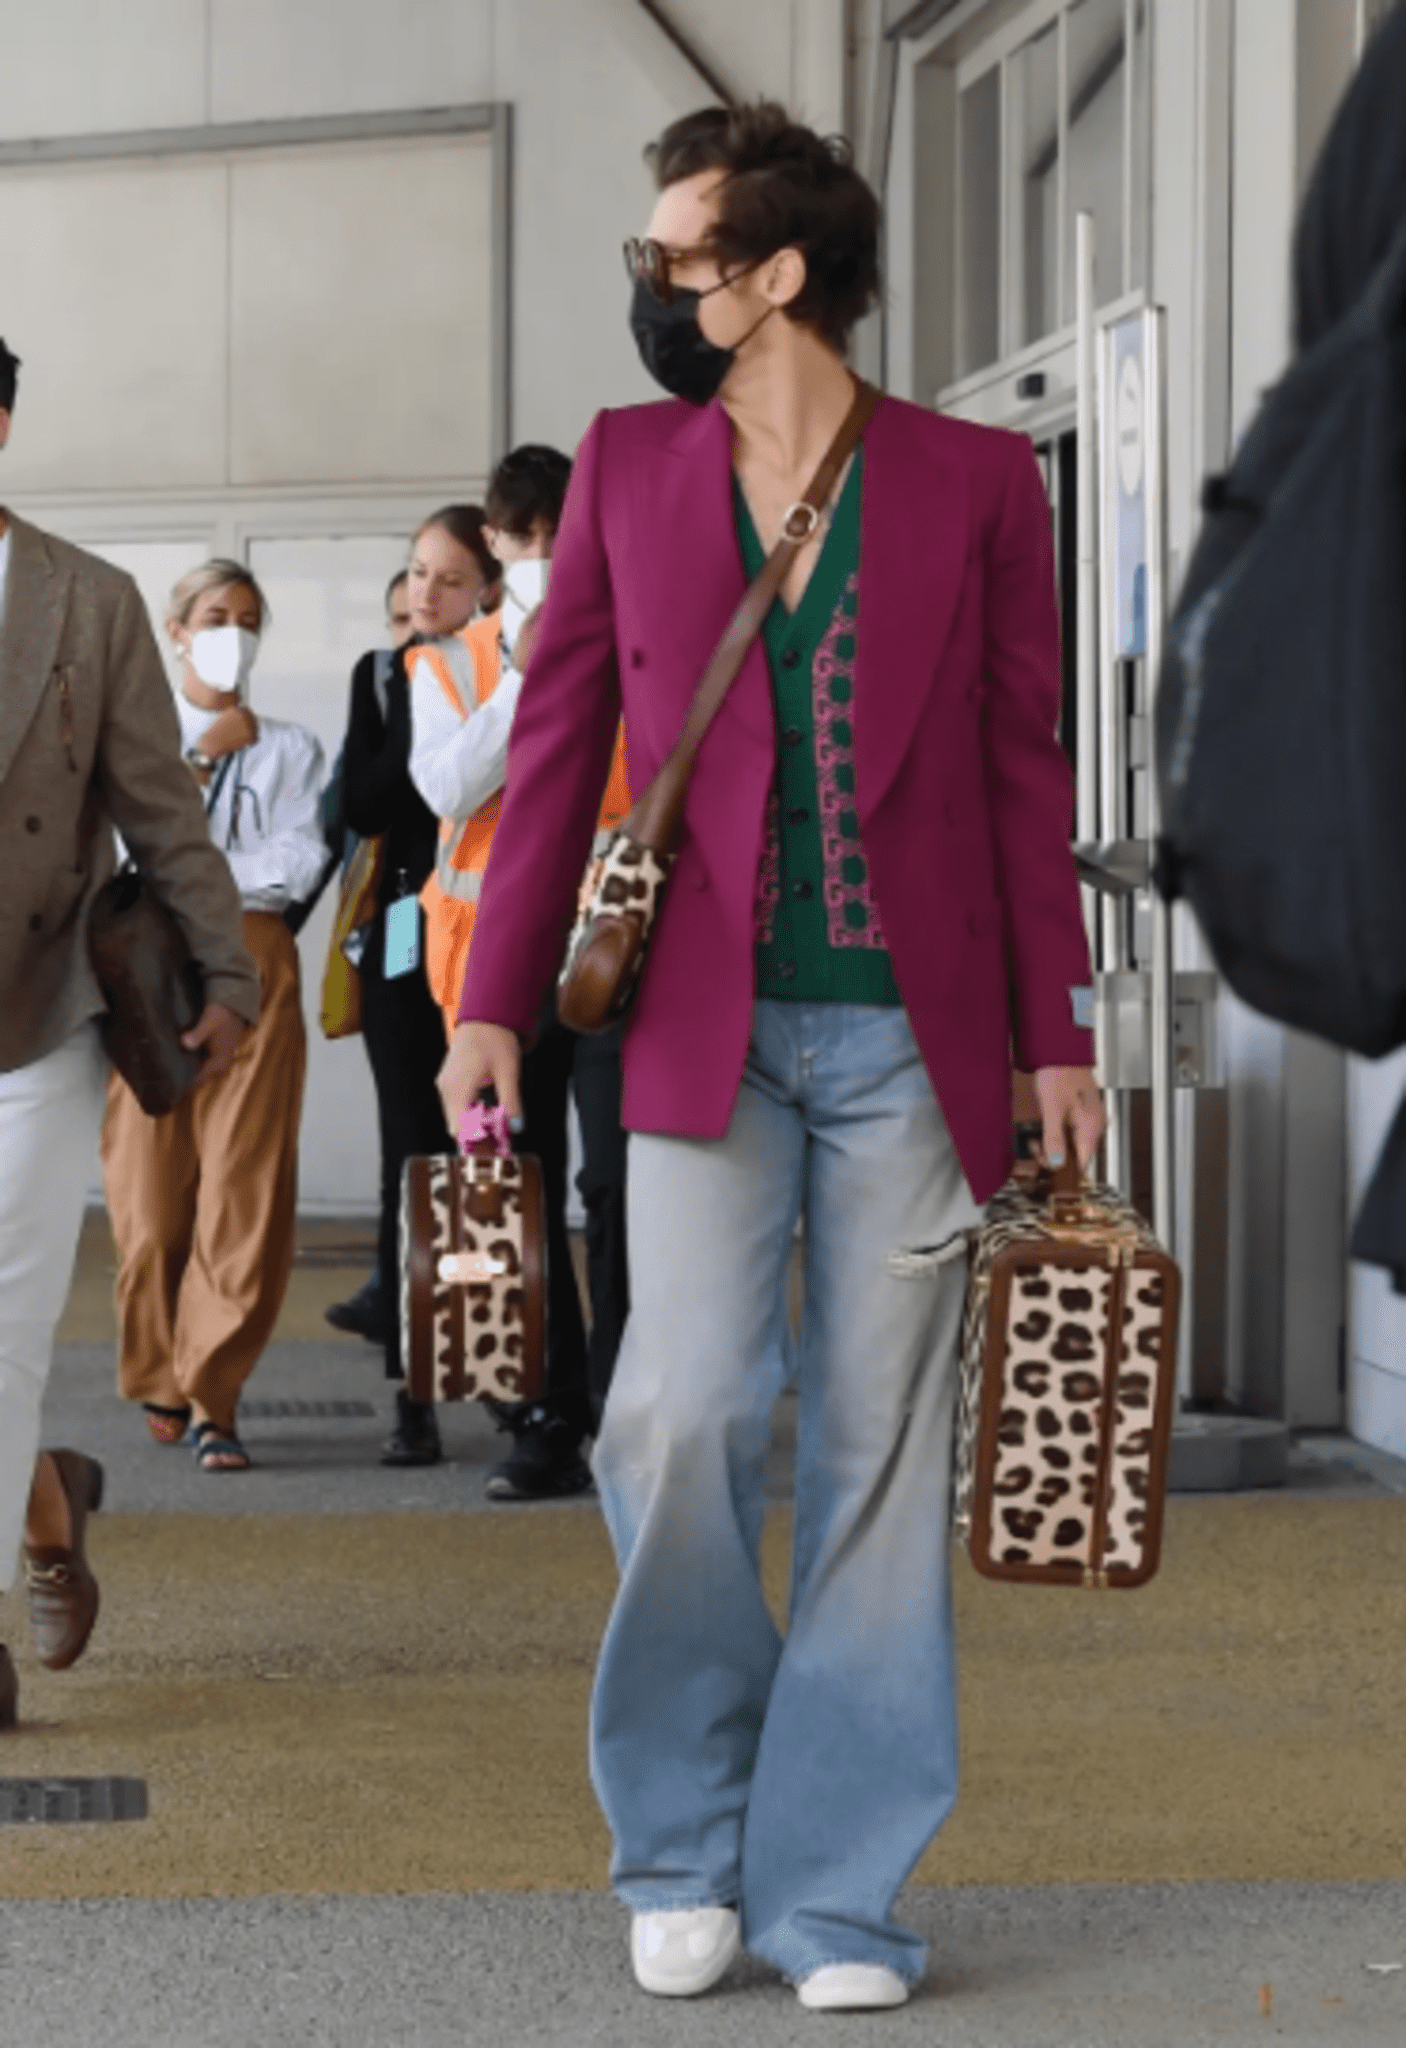 The 'One Direction' Harry Styles Exuded Sophistication As He Arrived At The Airport